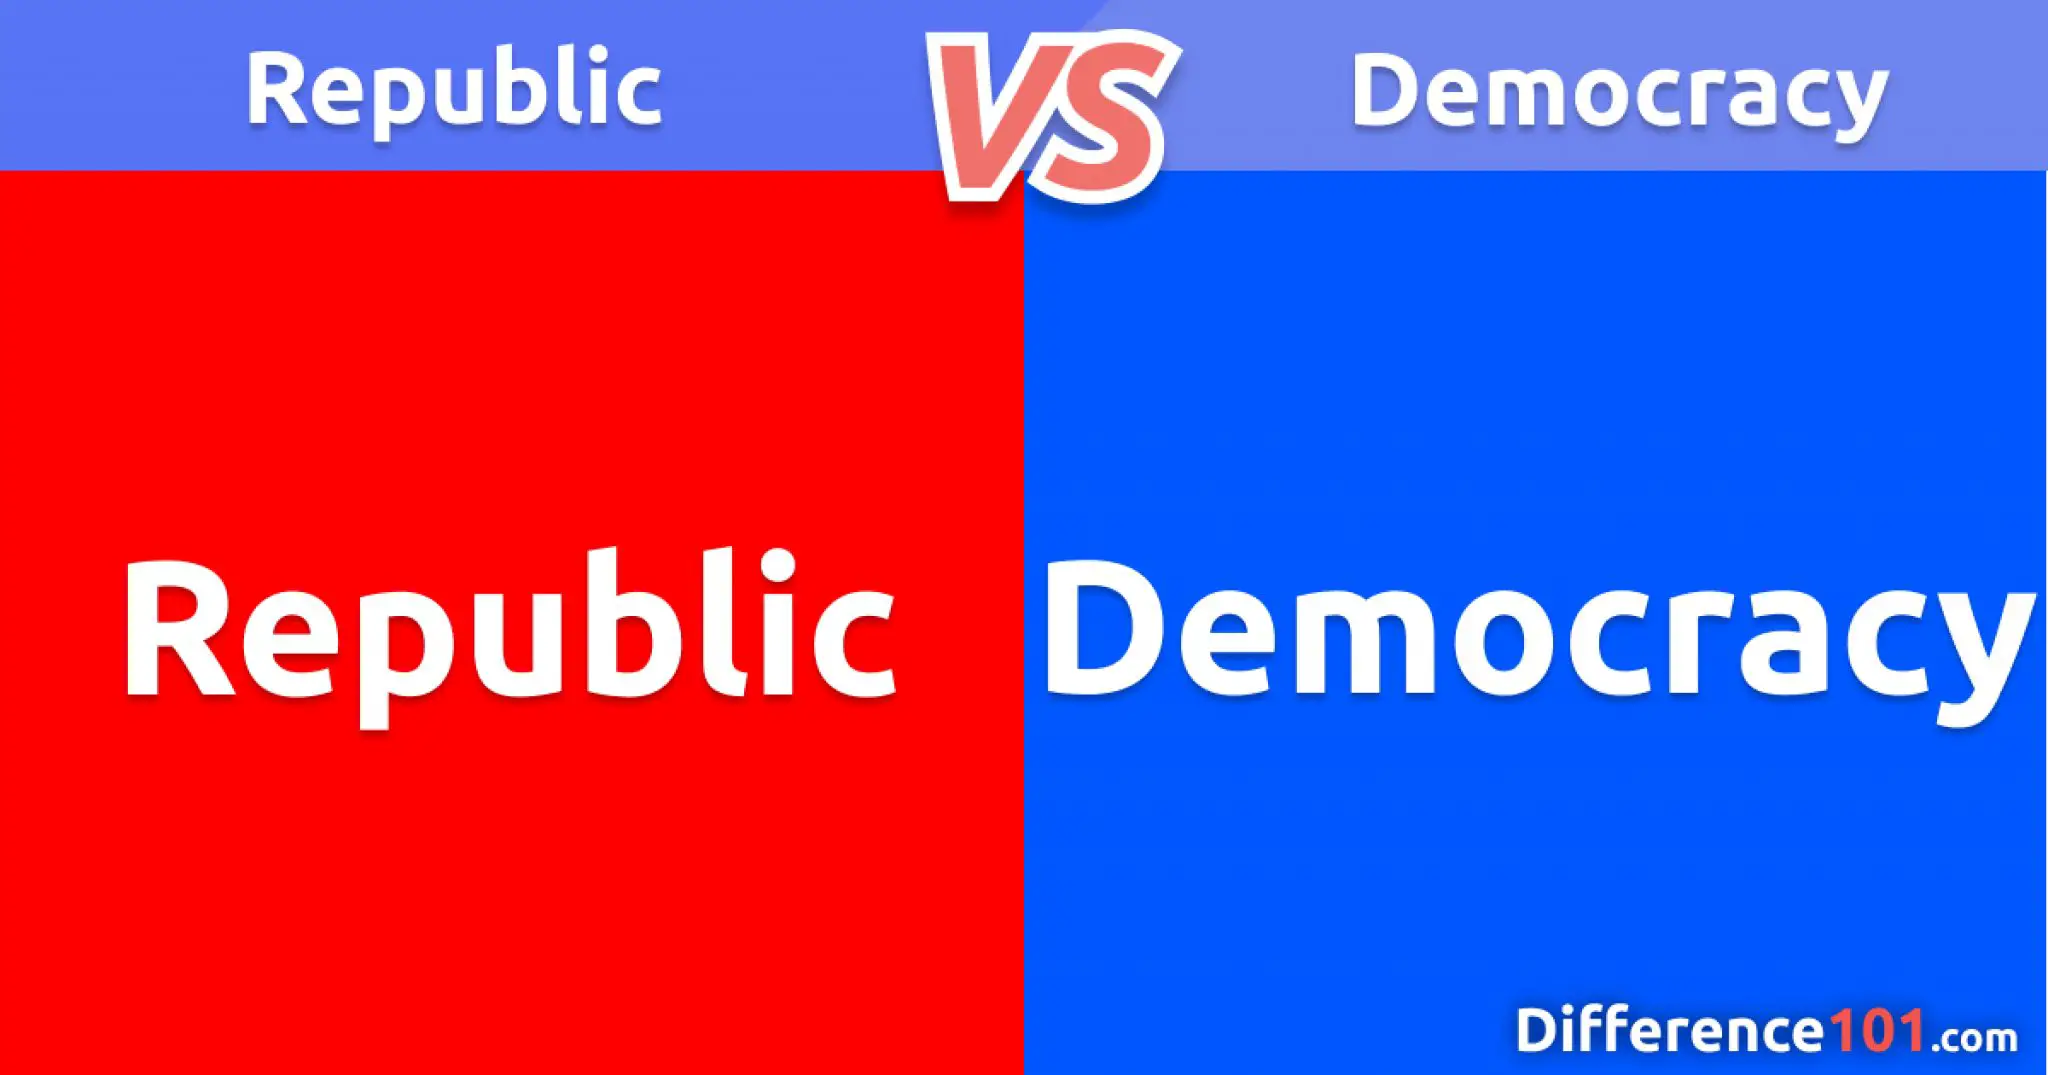 federalist paper 10 explains that the difference between a democracy and a republic is